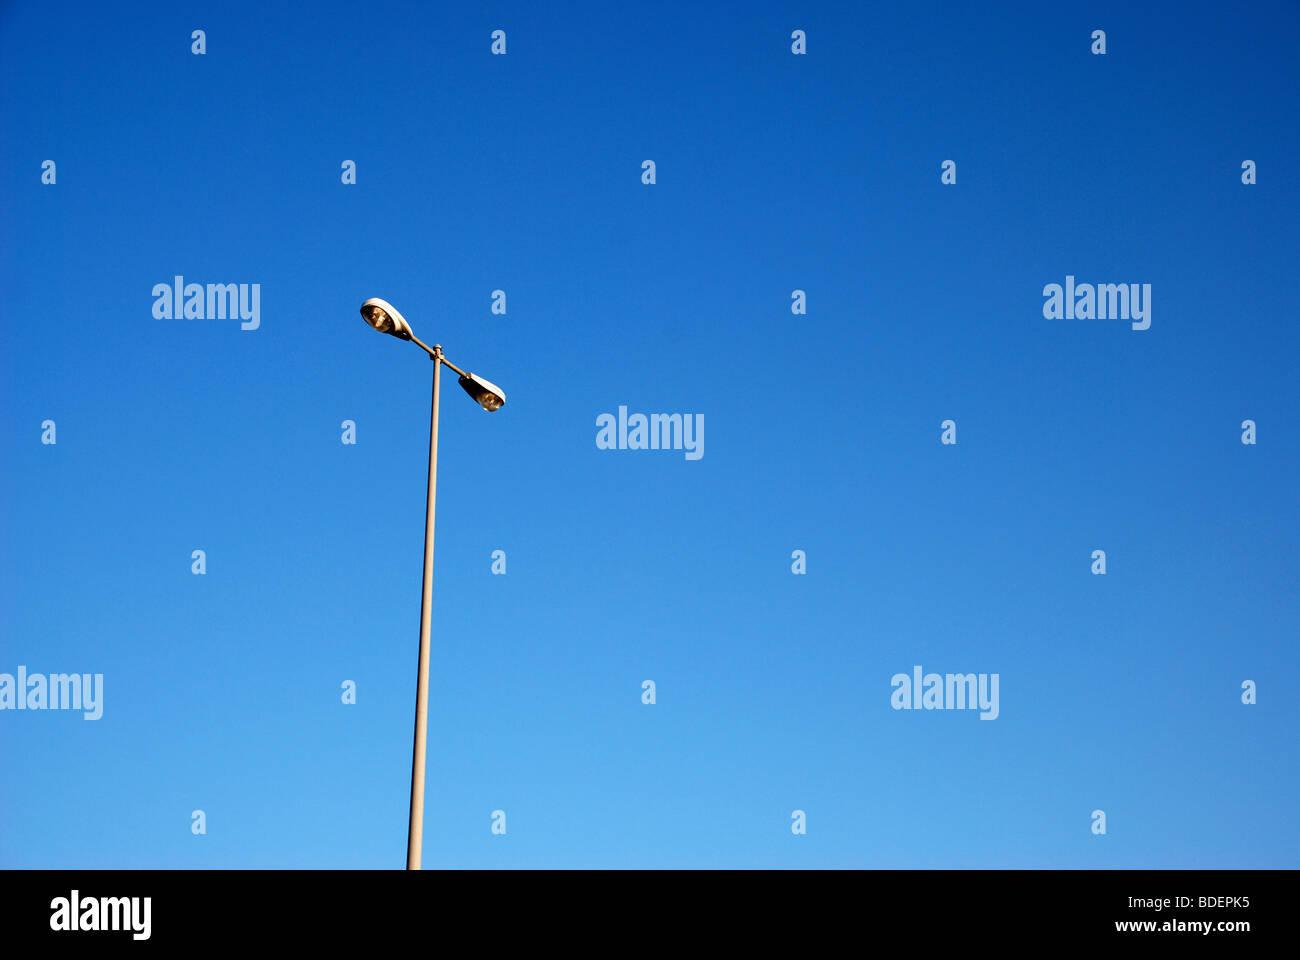 Rest are lamp posts against blue sky Stock Photo